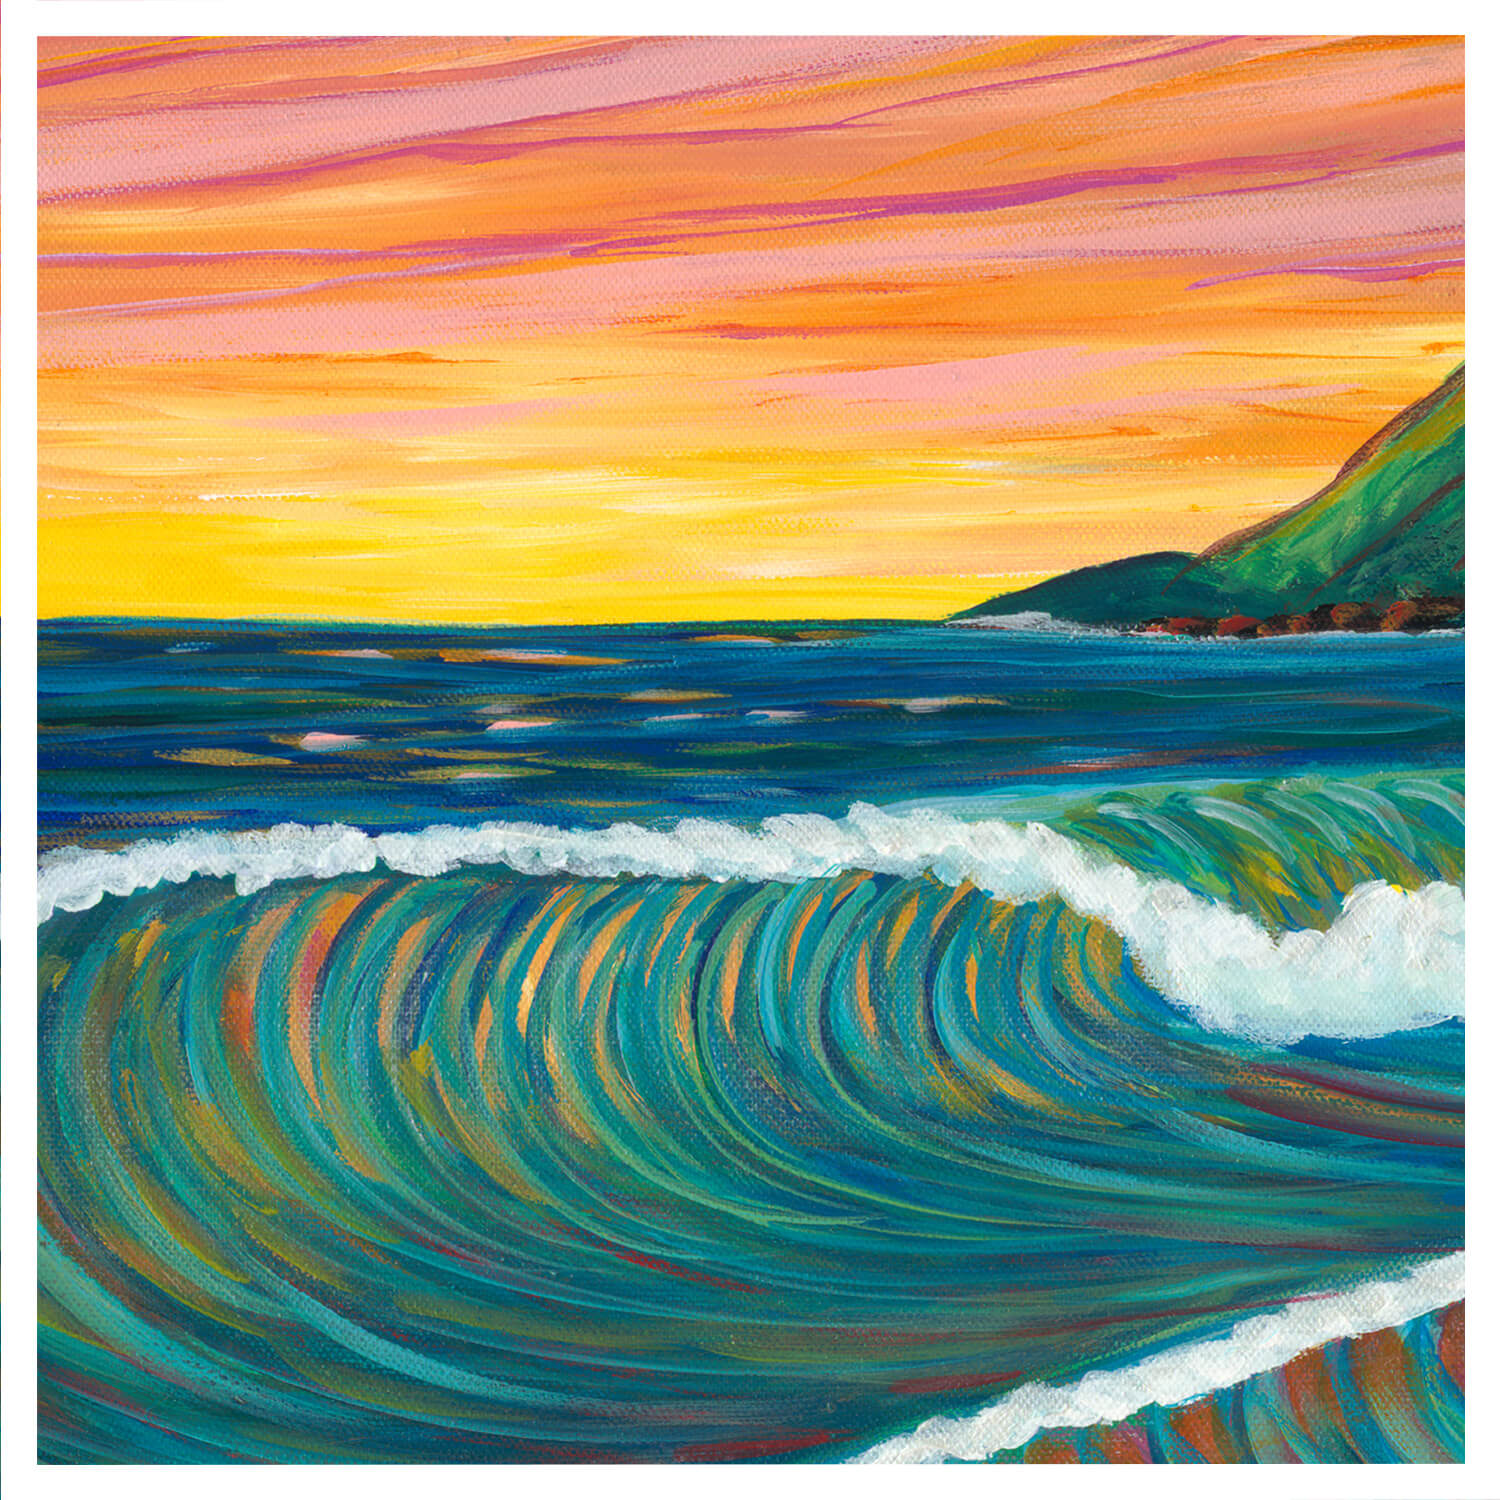 An illustration of a wave by hawaii artist Suzanne MacAdam